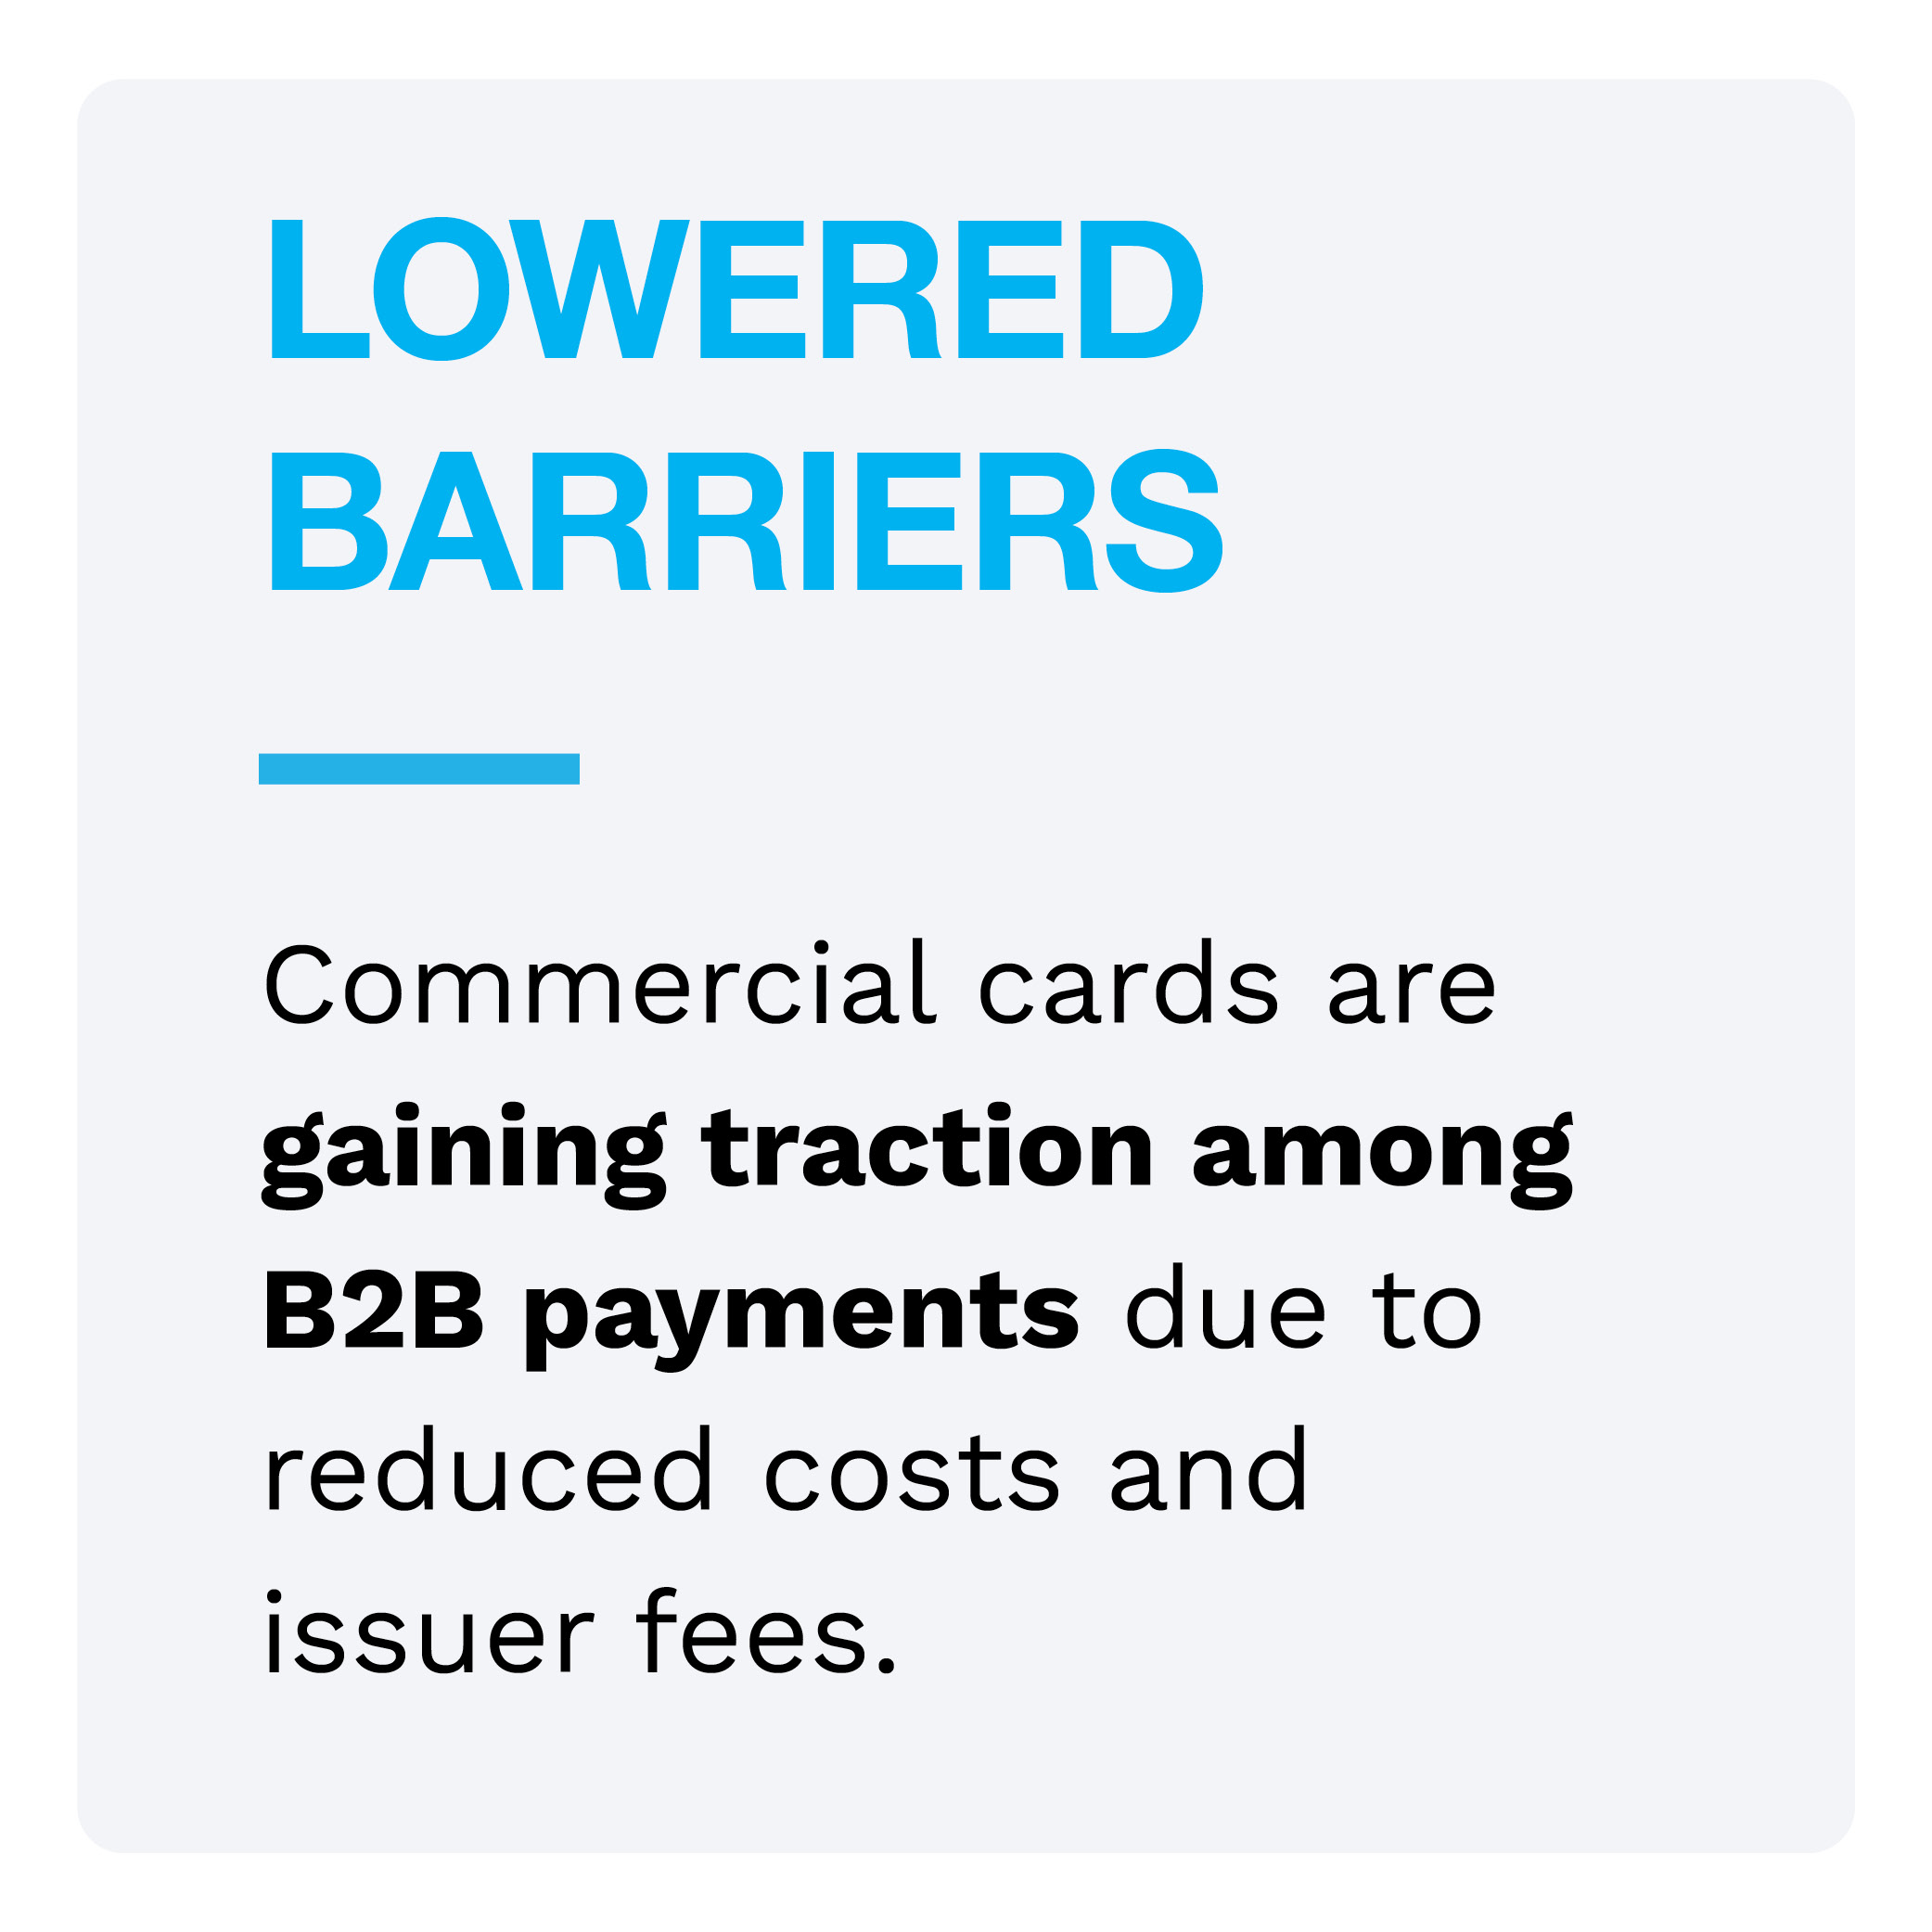 LOWERED BARRIERS: Commercial cards are gaining traction among B2B payments due to reduced costs and issuer fees.